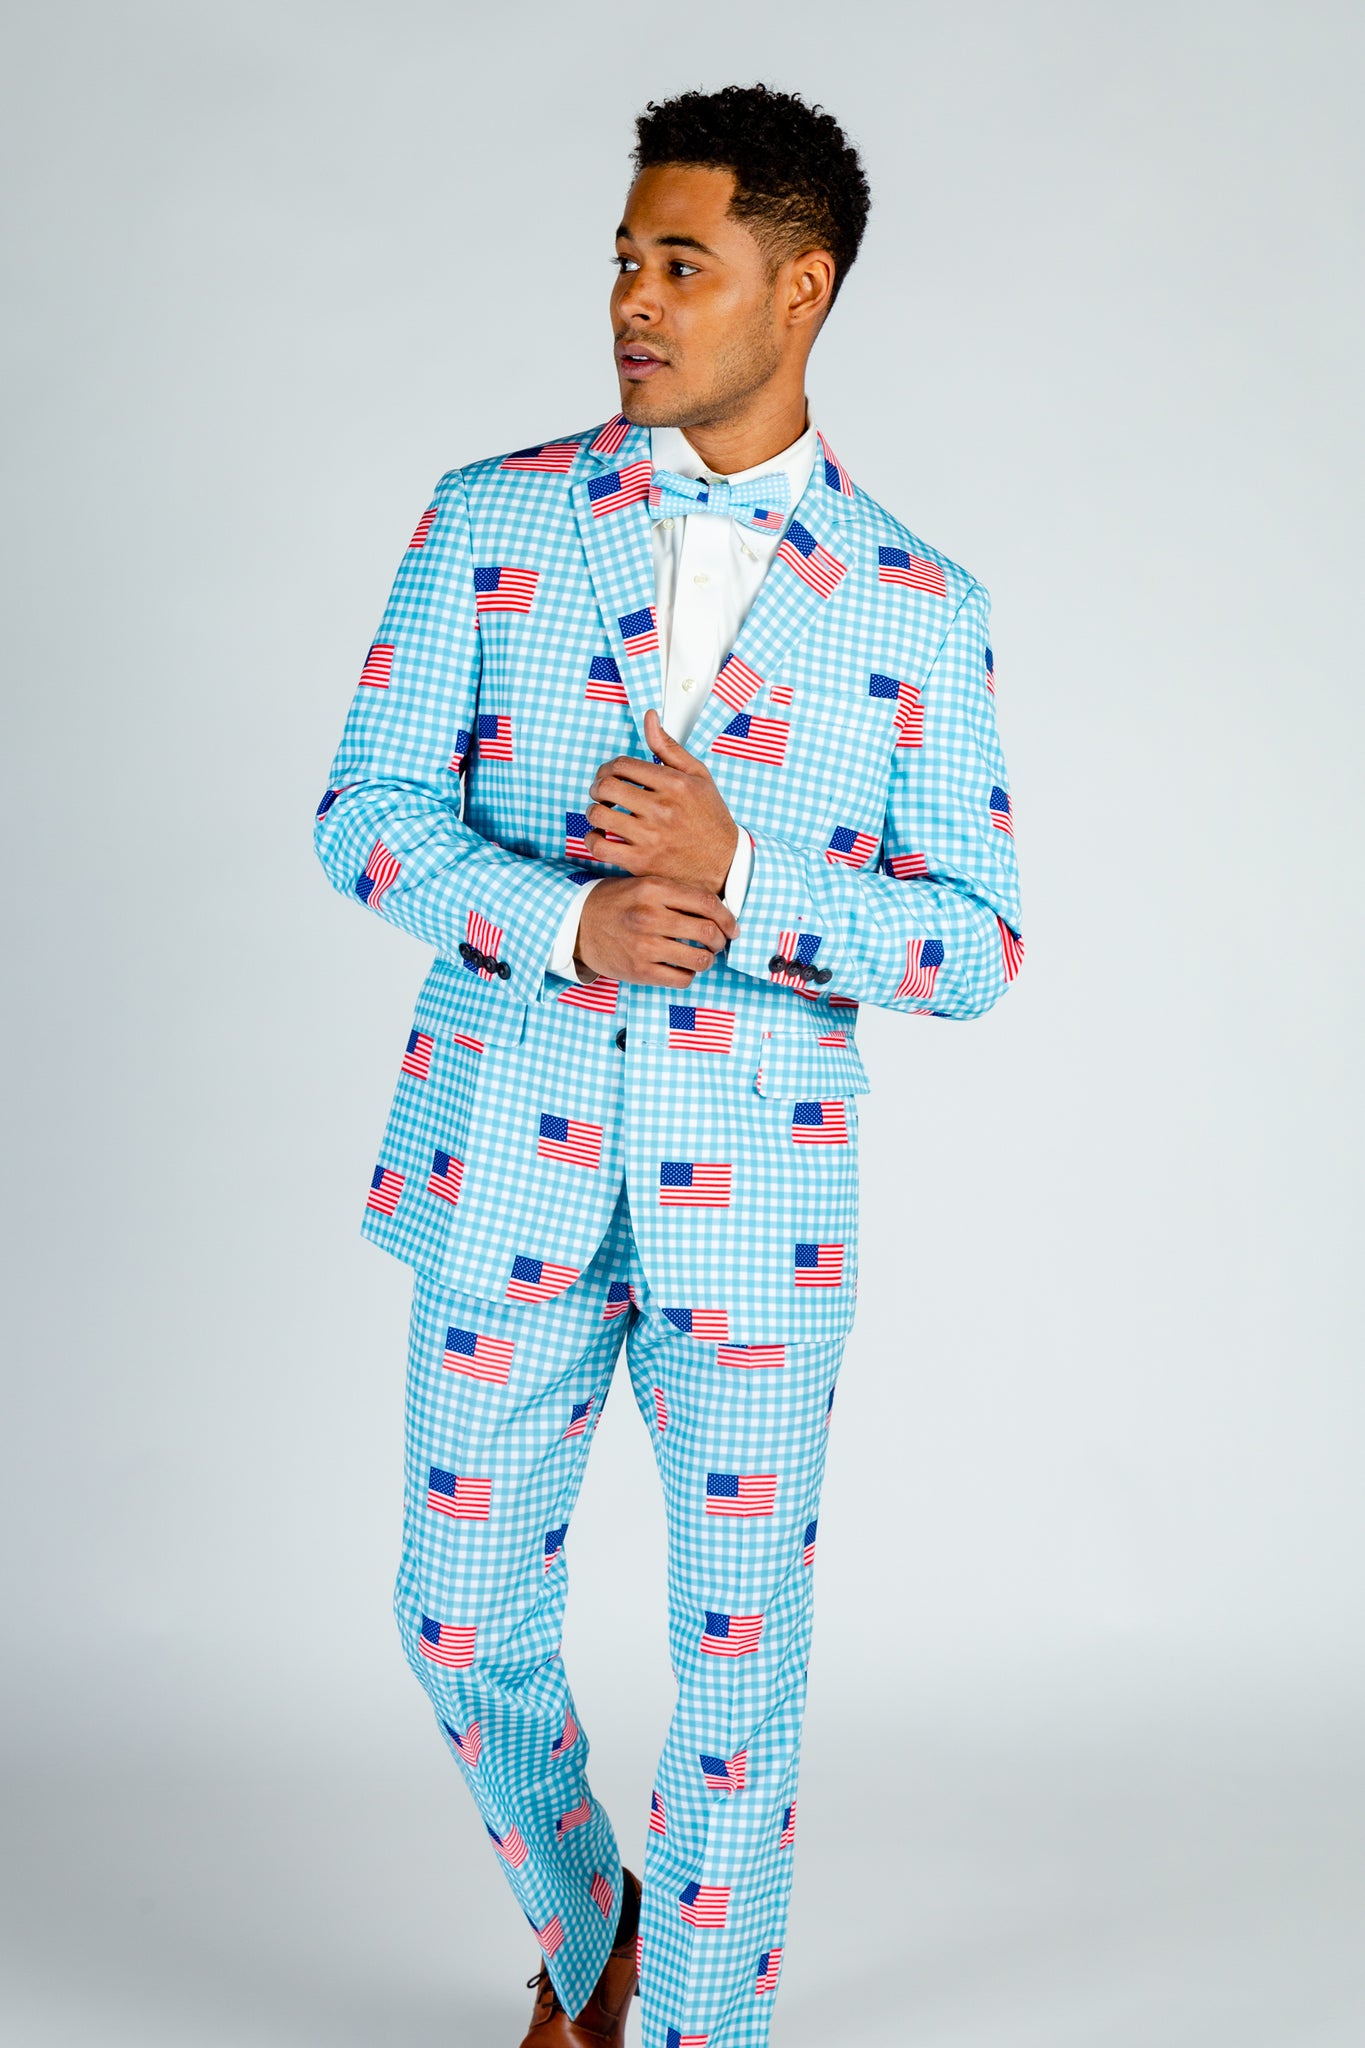 Derby Suits for Kentucky, Belmont & Preakness by Shinesty Page 2